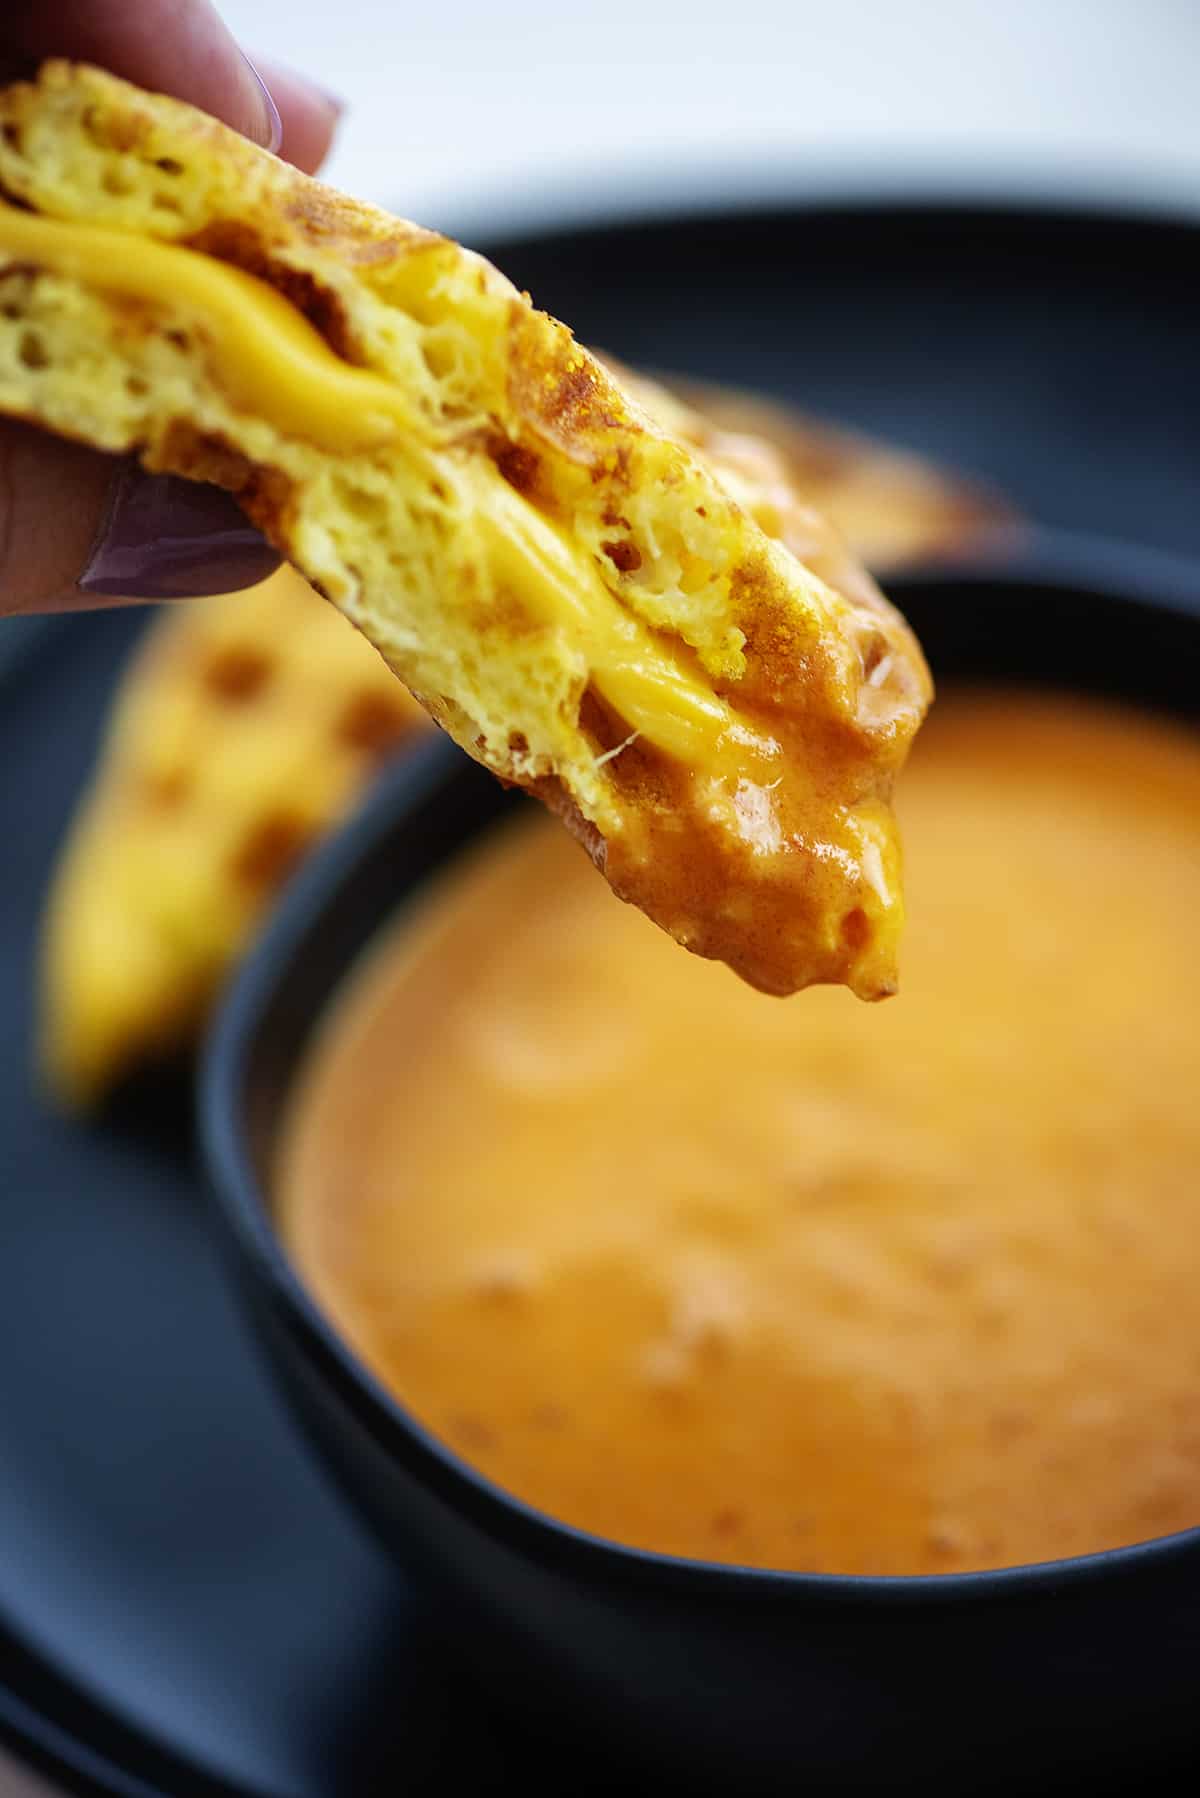 Grilled cheese chaffle dipped in tomato soup.